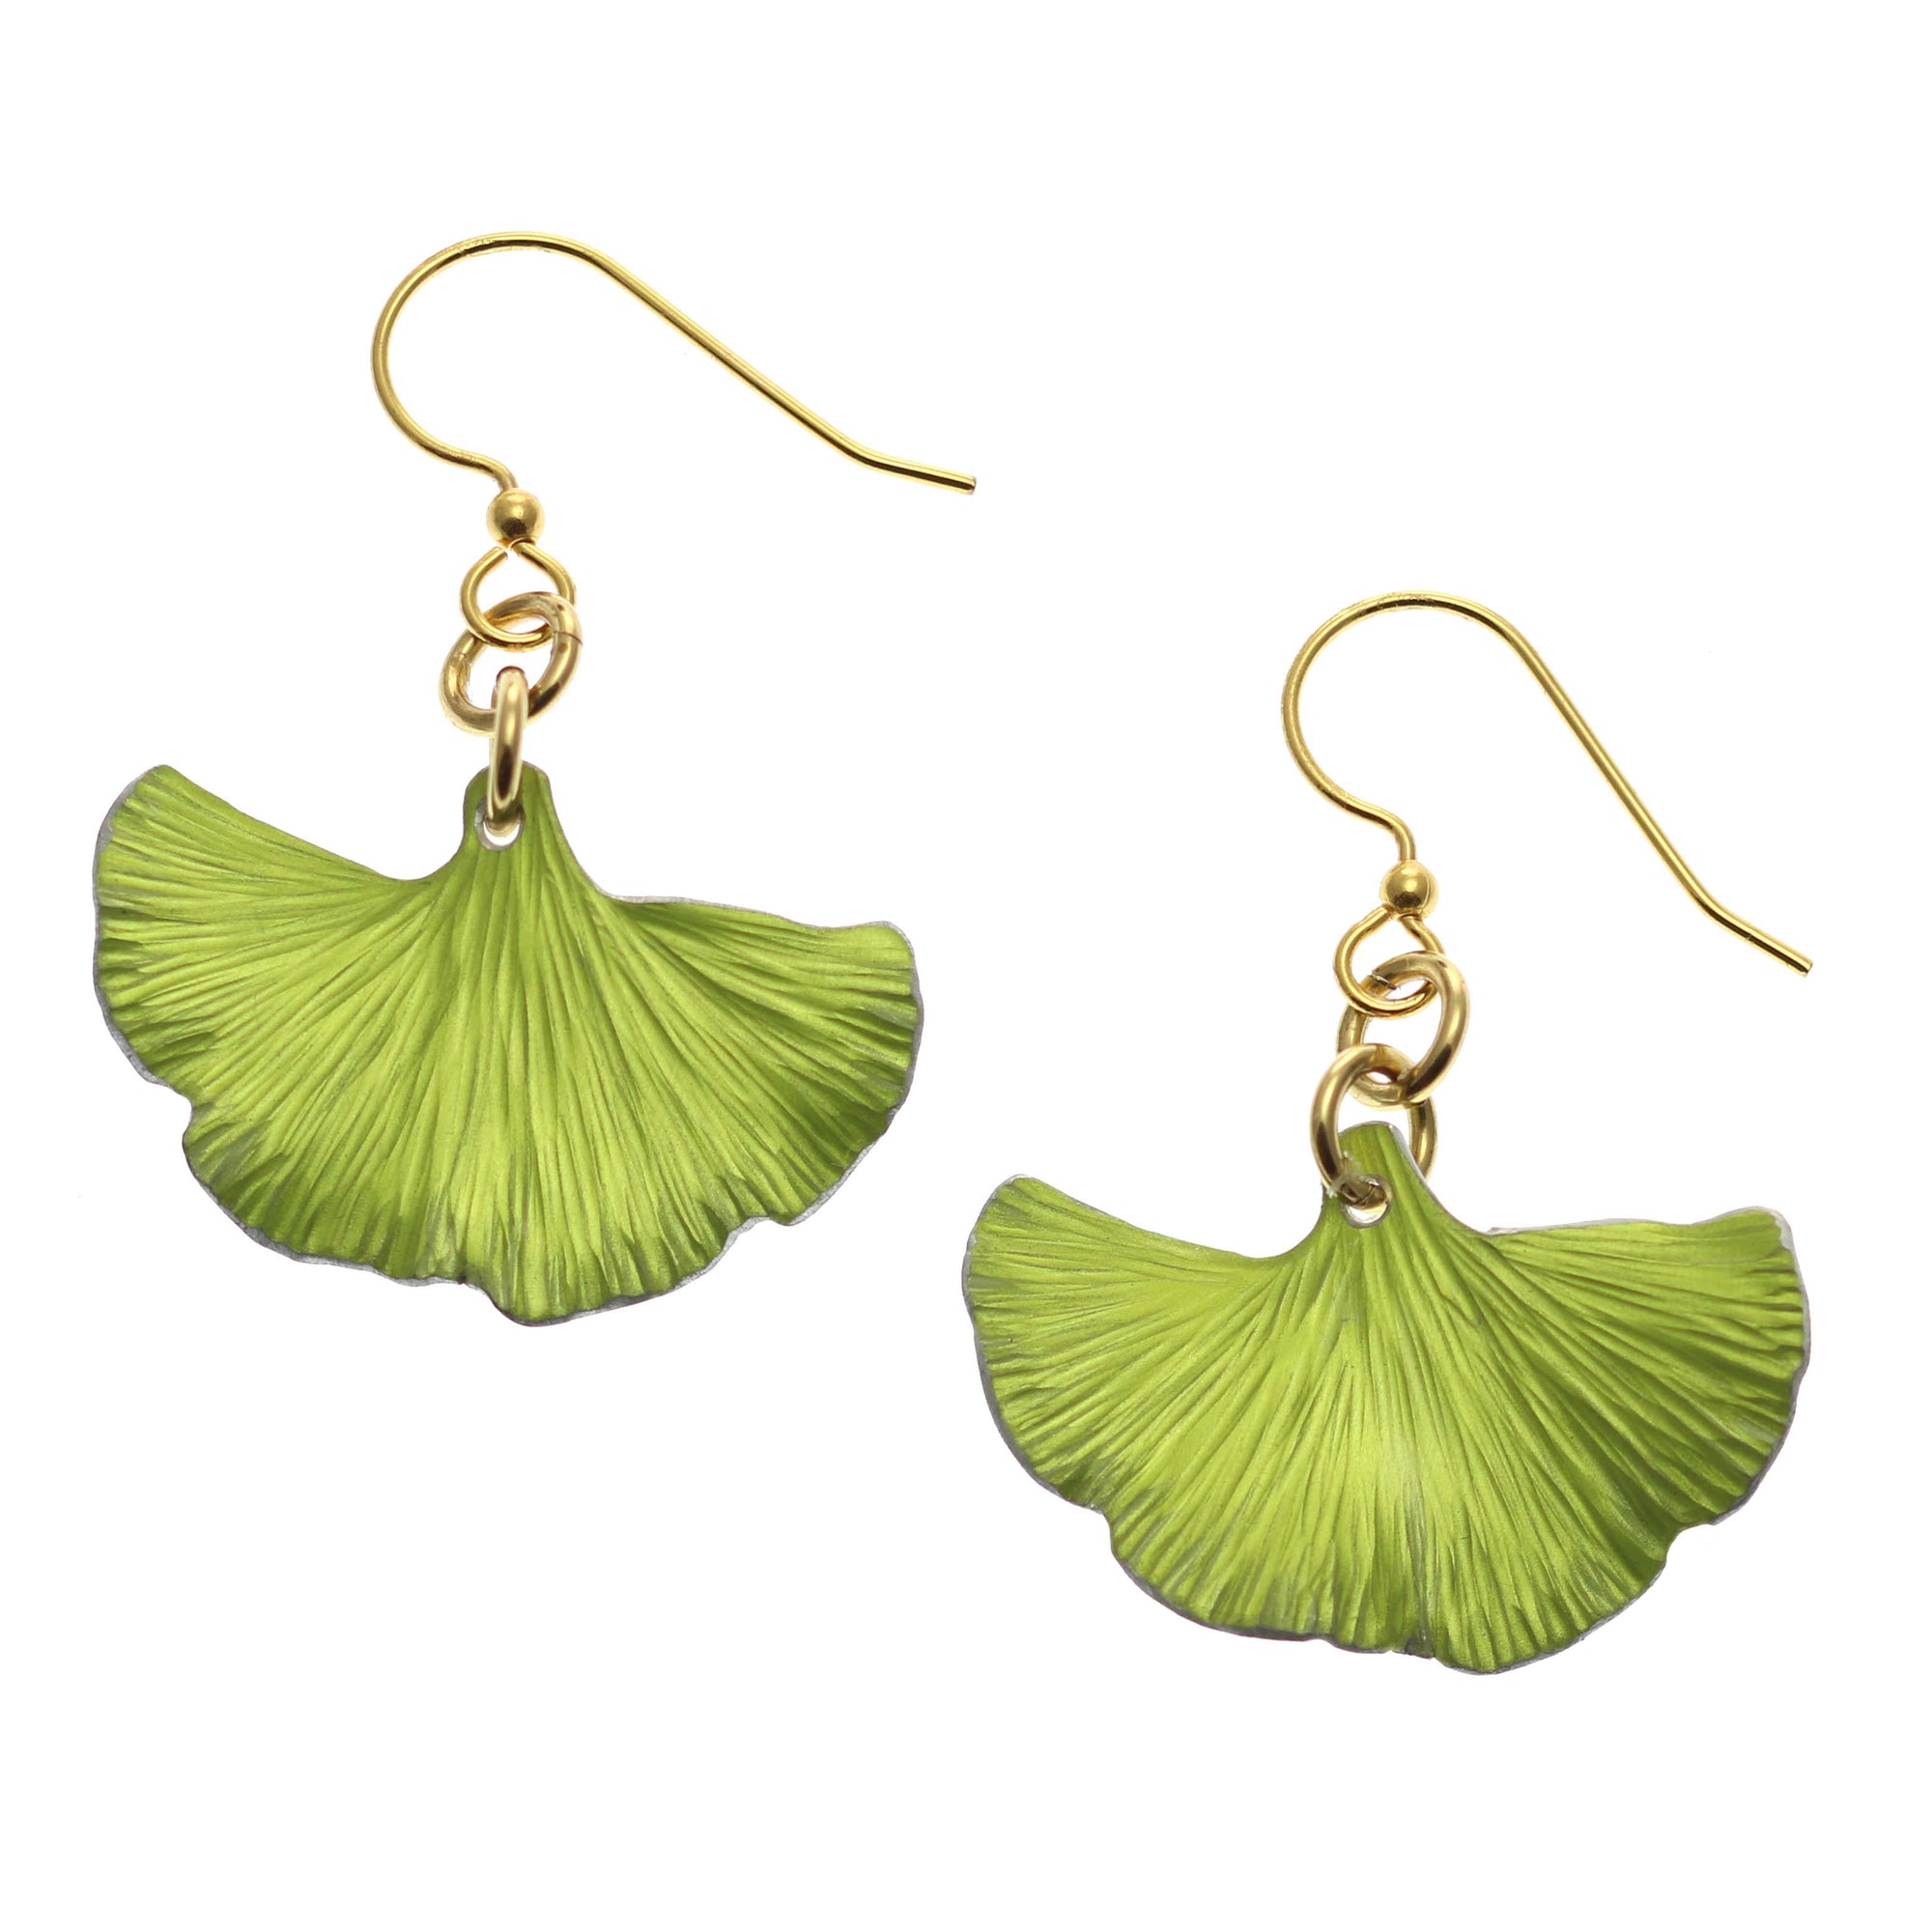 Small Ginkgo Leaf Anodized Aluminum Sour Candy Apple Earrings